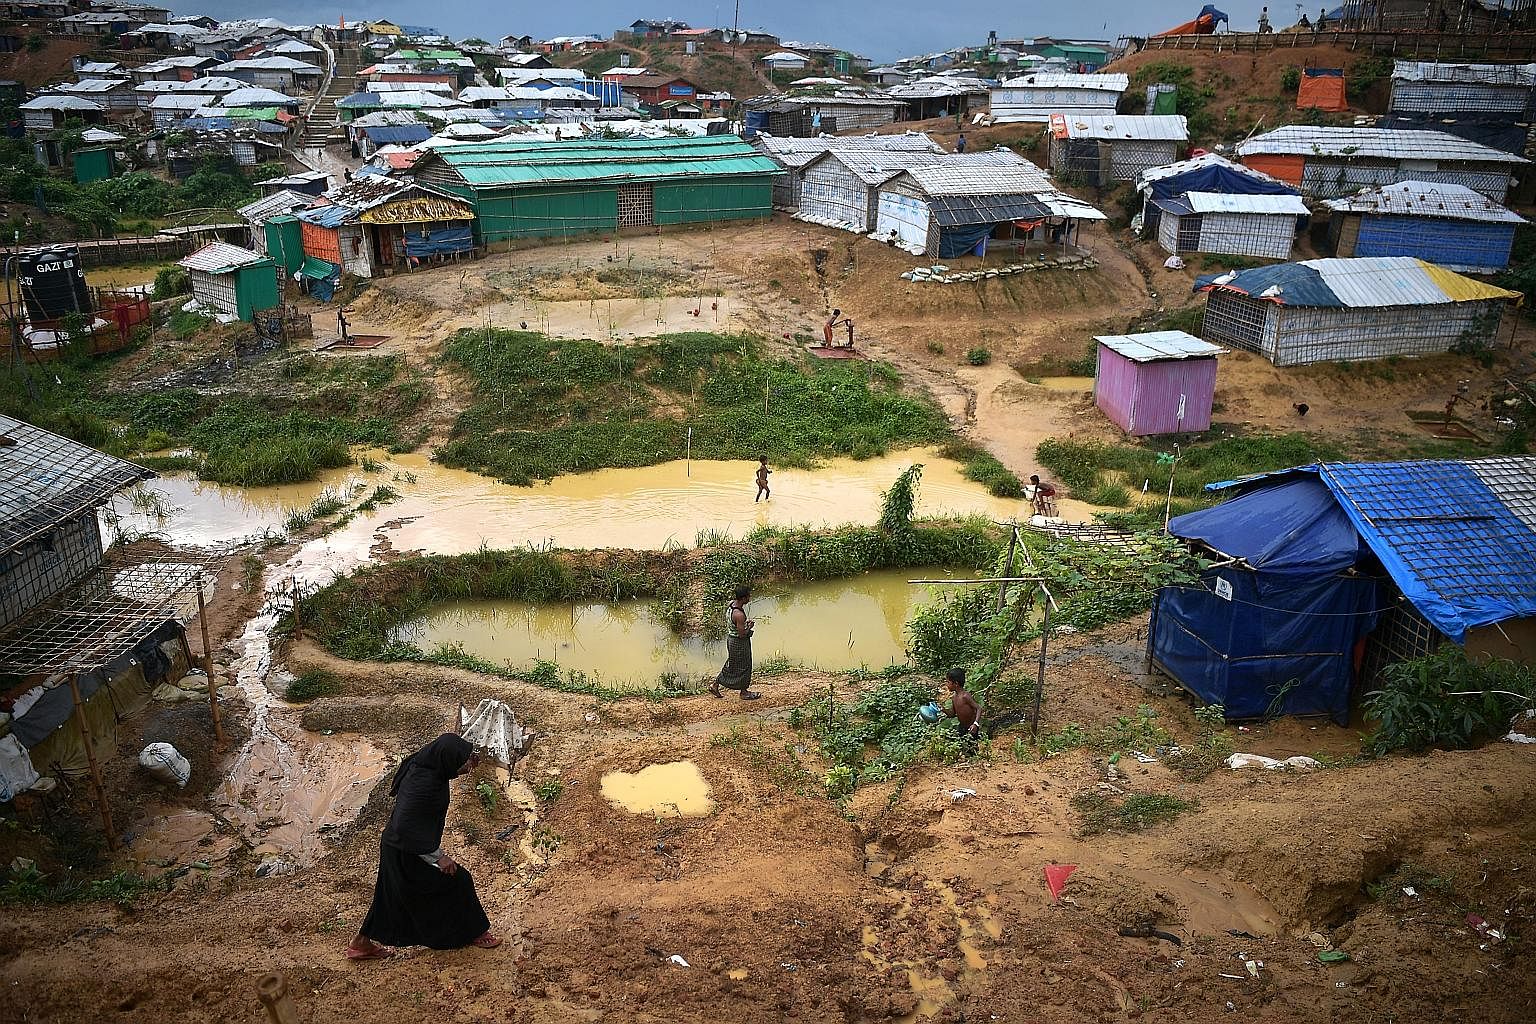 The ST team spent nine days in Bangladesh to curate a first-hand account of the daily existence of the Rohingya refugees in camps there. Rohingya refugees at the Kutupalong mega camp in Bangladesh's Cox's Bazar district in July. About 919,000 Rohingy